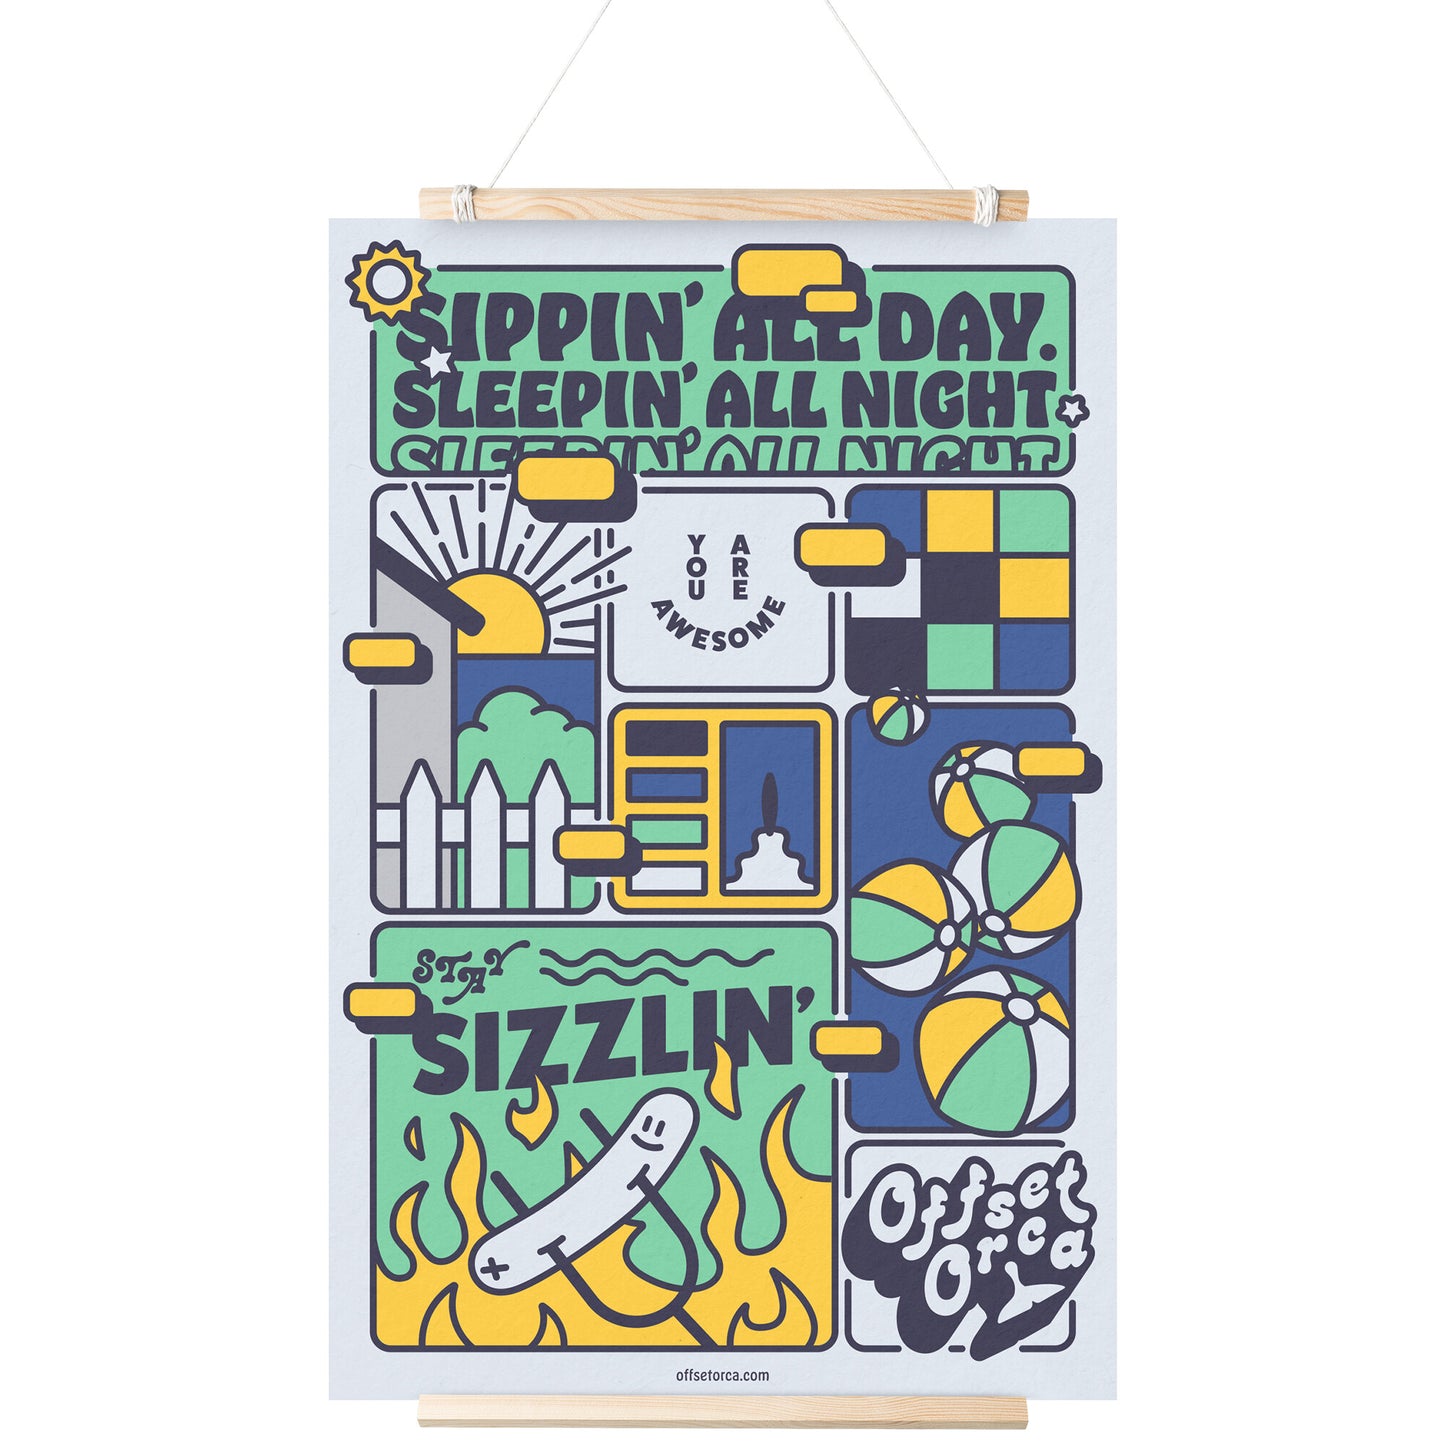 Sippin' All Day - 24x36 Poster